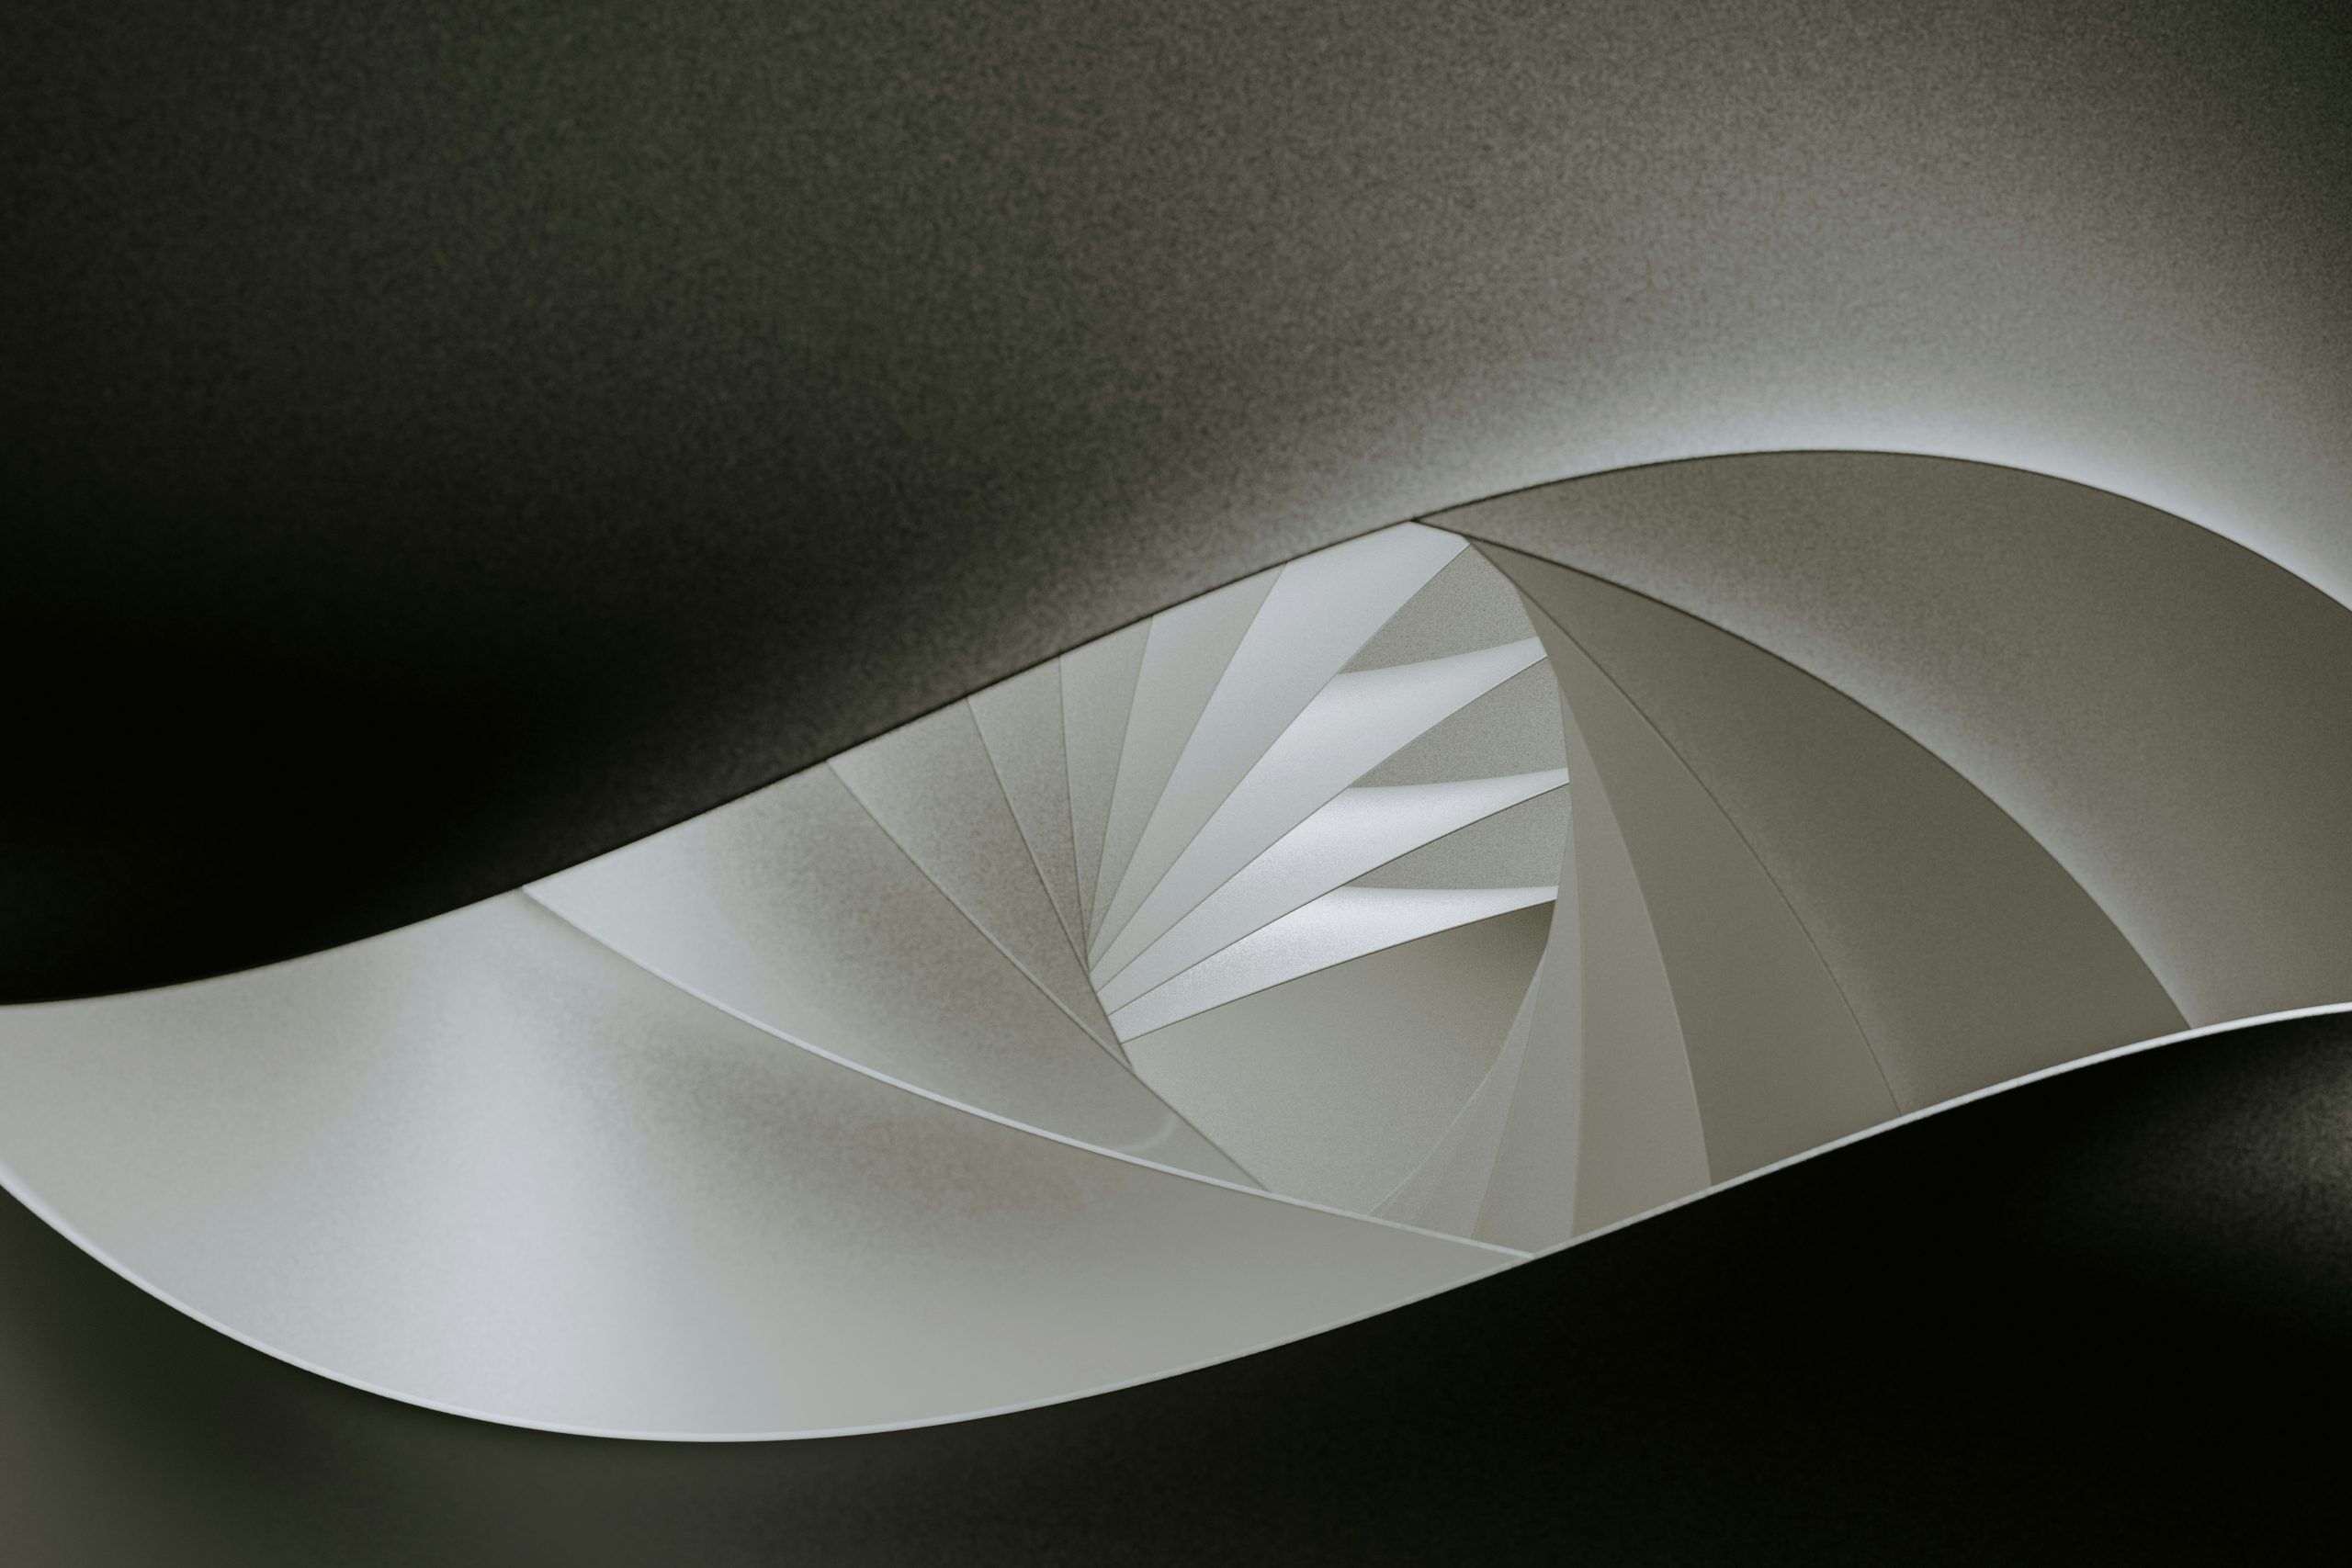 Abstract stair photo with lovely flowing lines